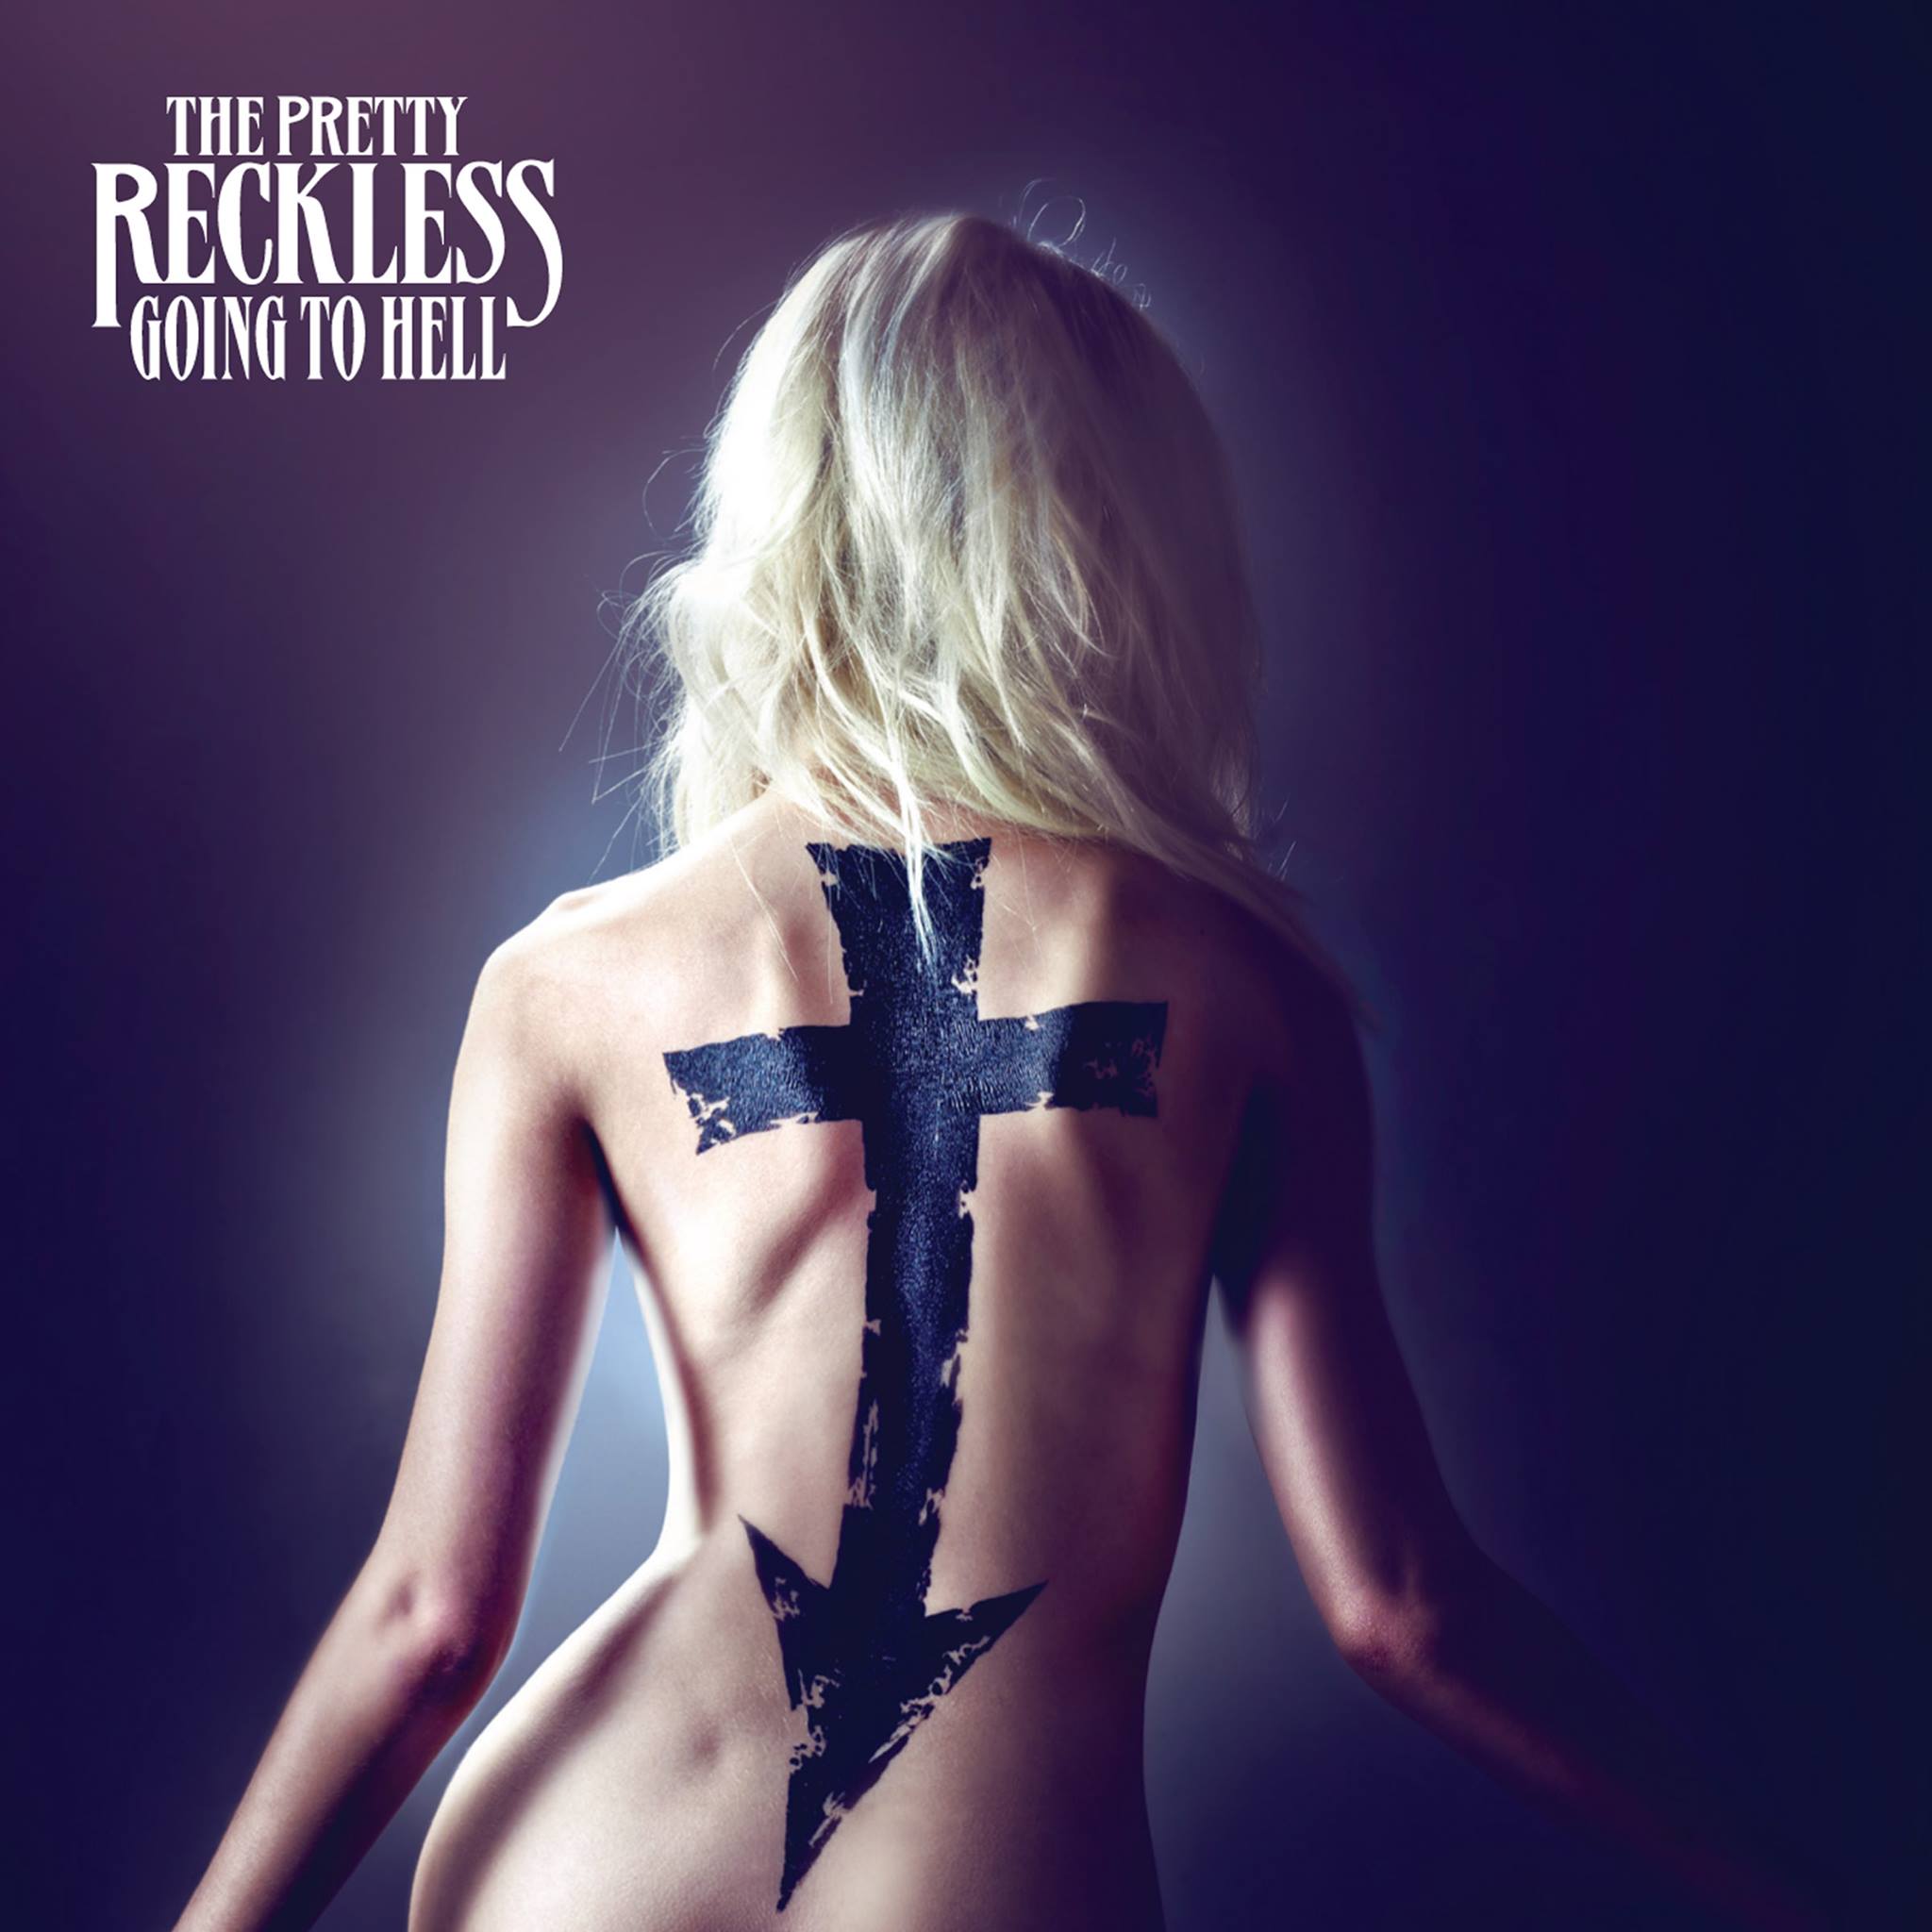 News Added Jun 05, 2013 Taylor Momsen's band The Pretty Reckless are finally releasing news on their sophomore album which will be titled "Going to Hell." Not much has been announced of it yet, but the band released their first single, presumably from it, entitled "Kill Me" back in January, and then everything was silent. […]